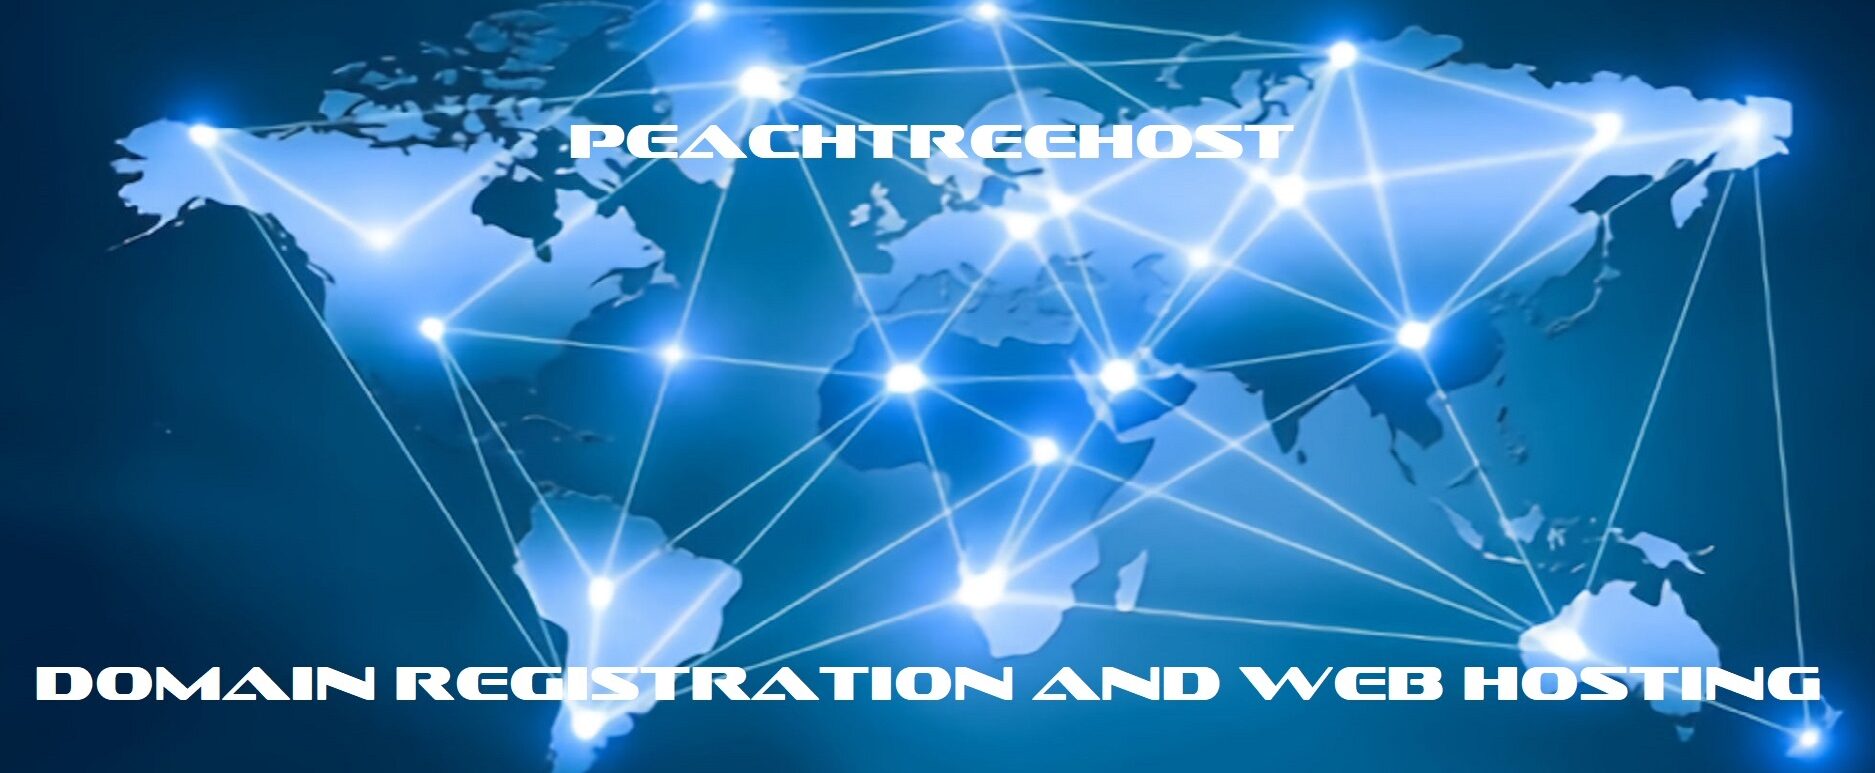 Peachtreehost